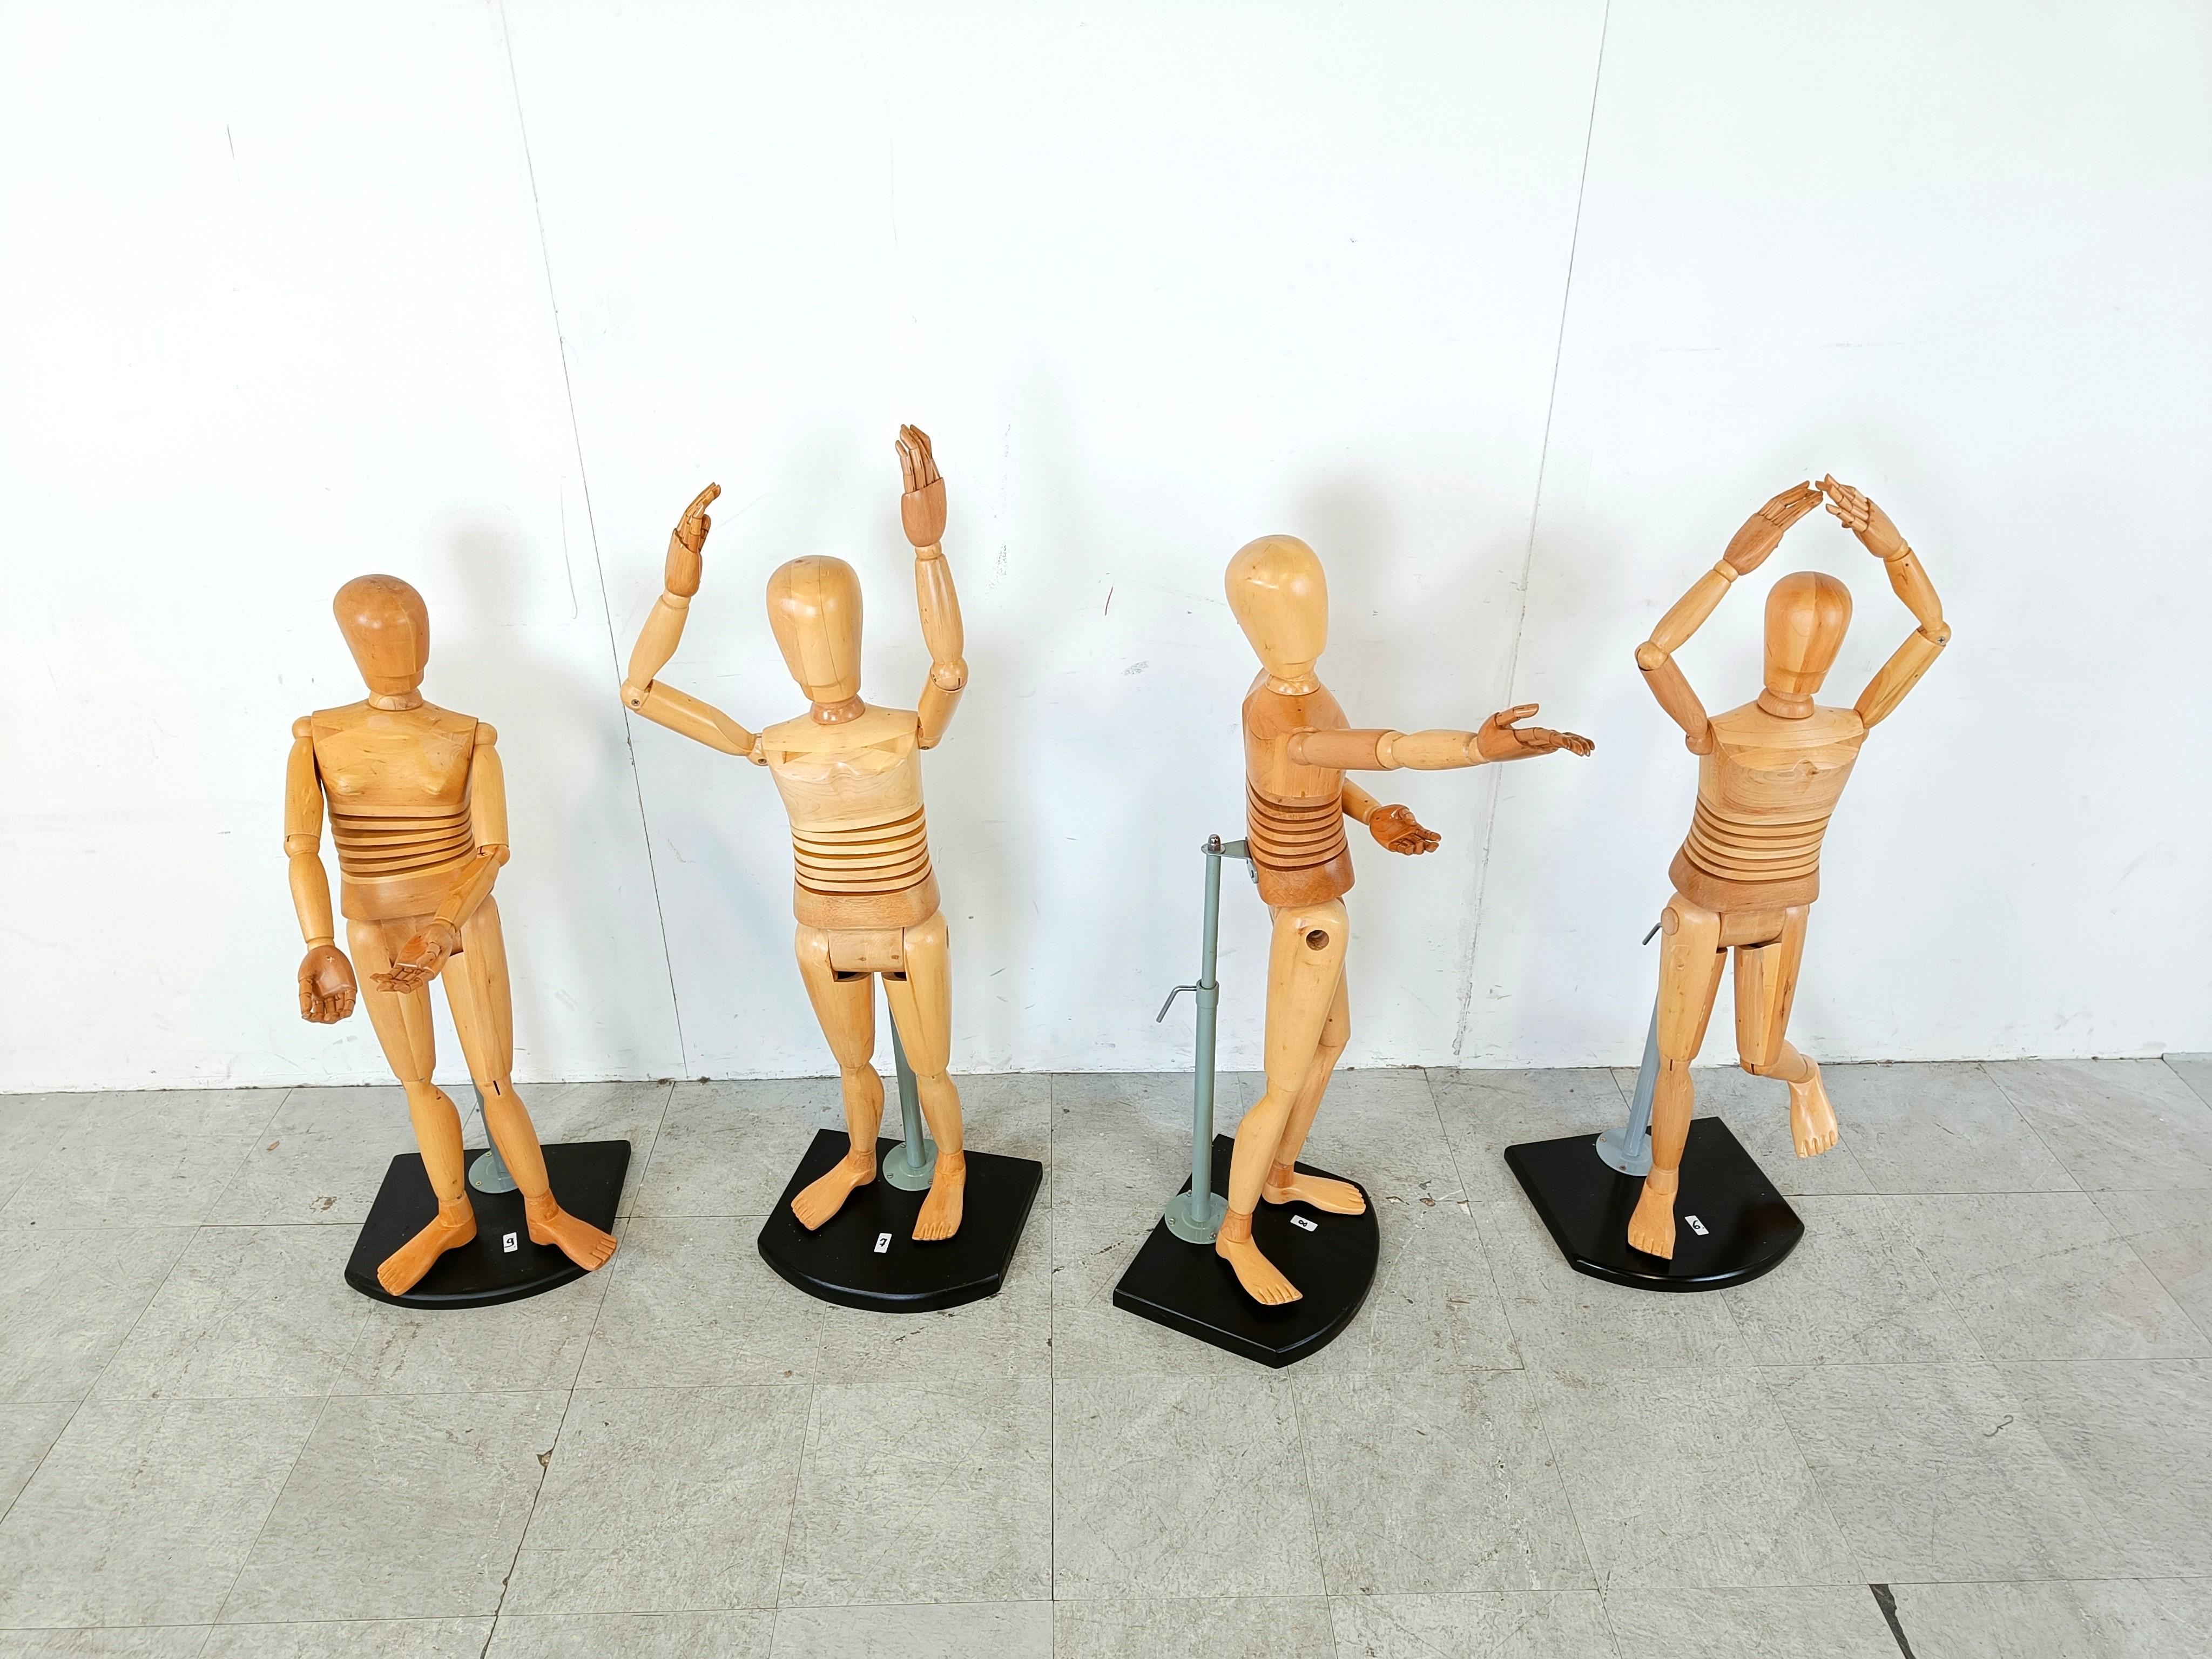 High quality wood articulated artistic Lay Figures.

These life size mannequins are made with great care and have a lot of positioning possibilities.

What is remarkable, is the engineering around the belly area, allowing these figure to bend in